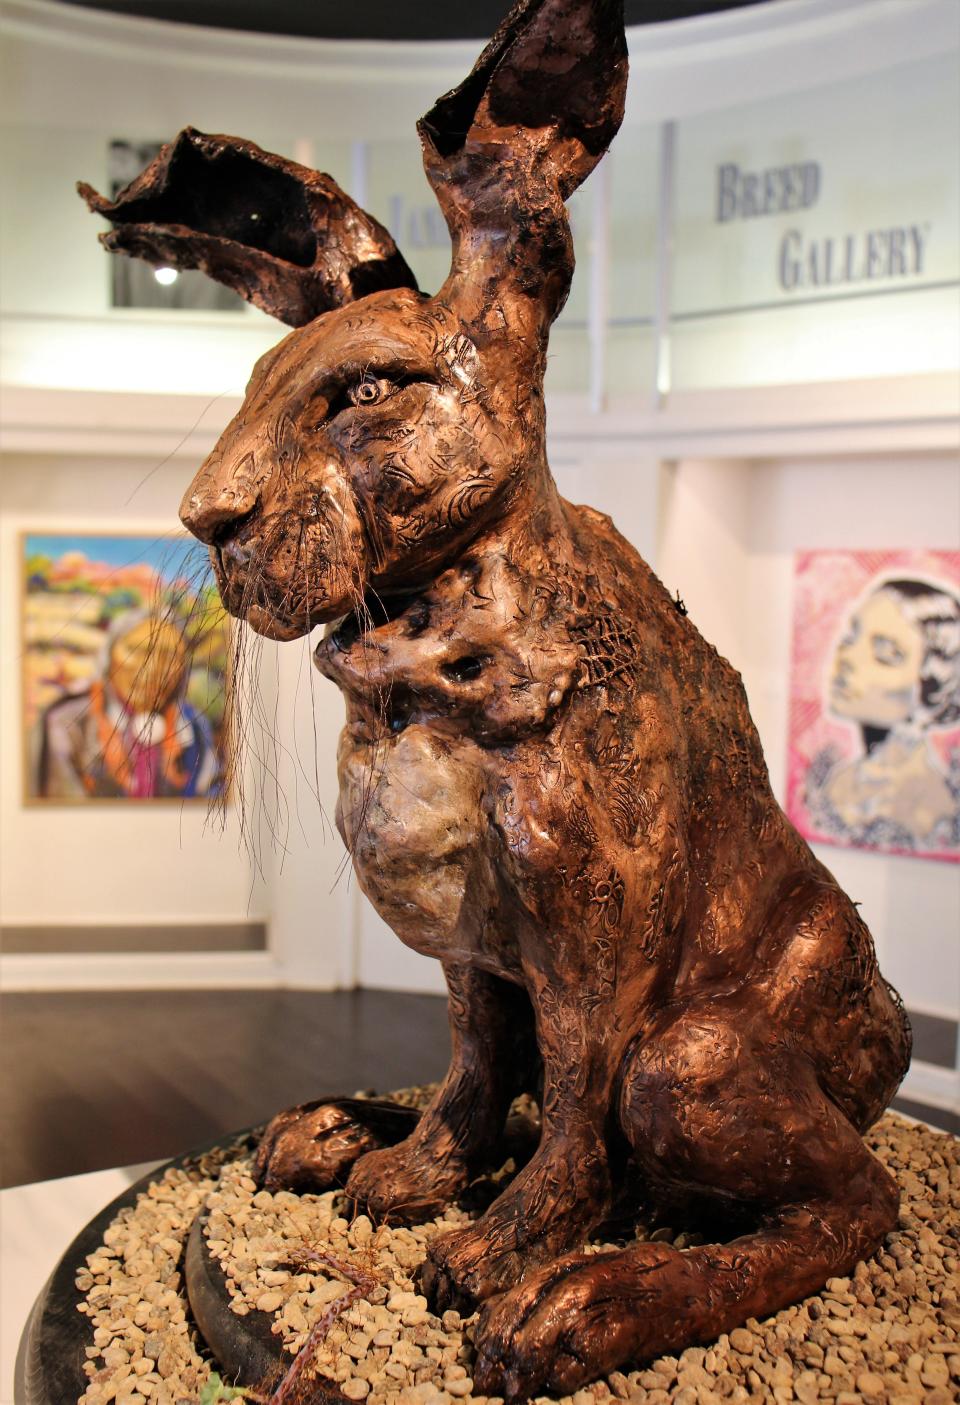 A clay work by Linda Stricklin titled "The Shapeshifter ... Mudpie O'Hare" at the Center for Contemporary Arts.